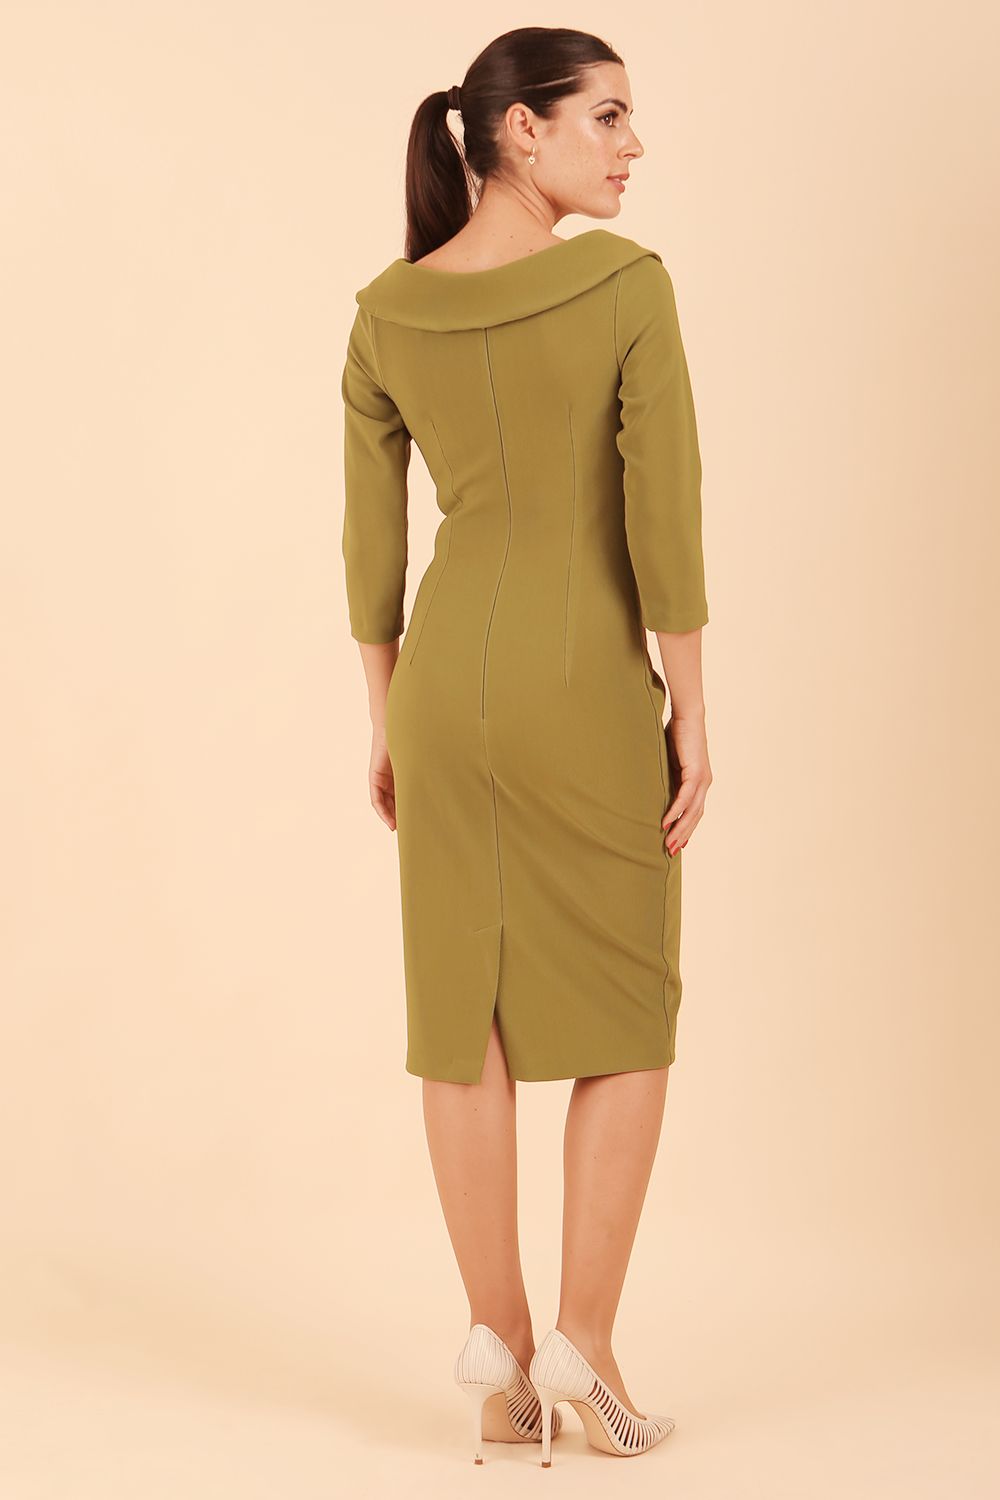 Model wearing diva catwalk Monique 3/4 Sleeve Pencil Dress with Overlapping Folded Round Neckline and 3/4 sleeves and knee length in Jasmine Green back